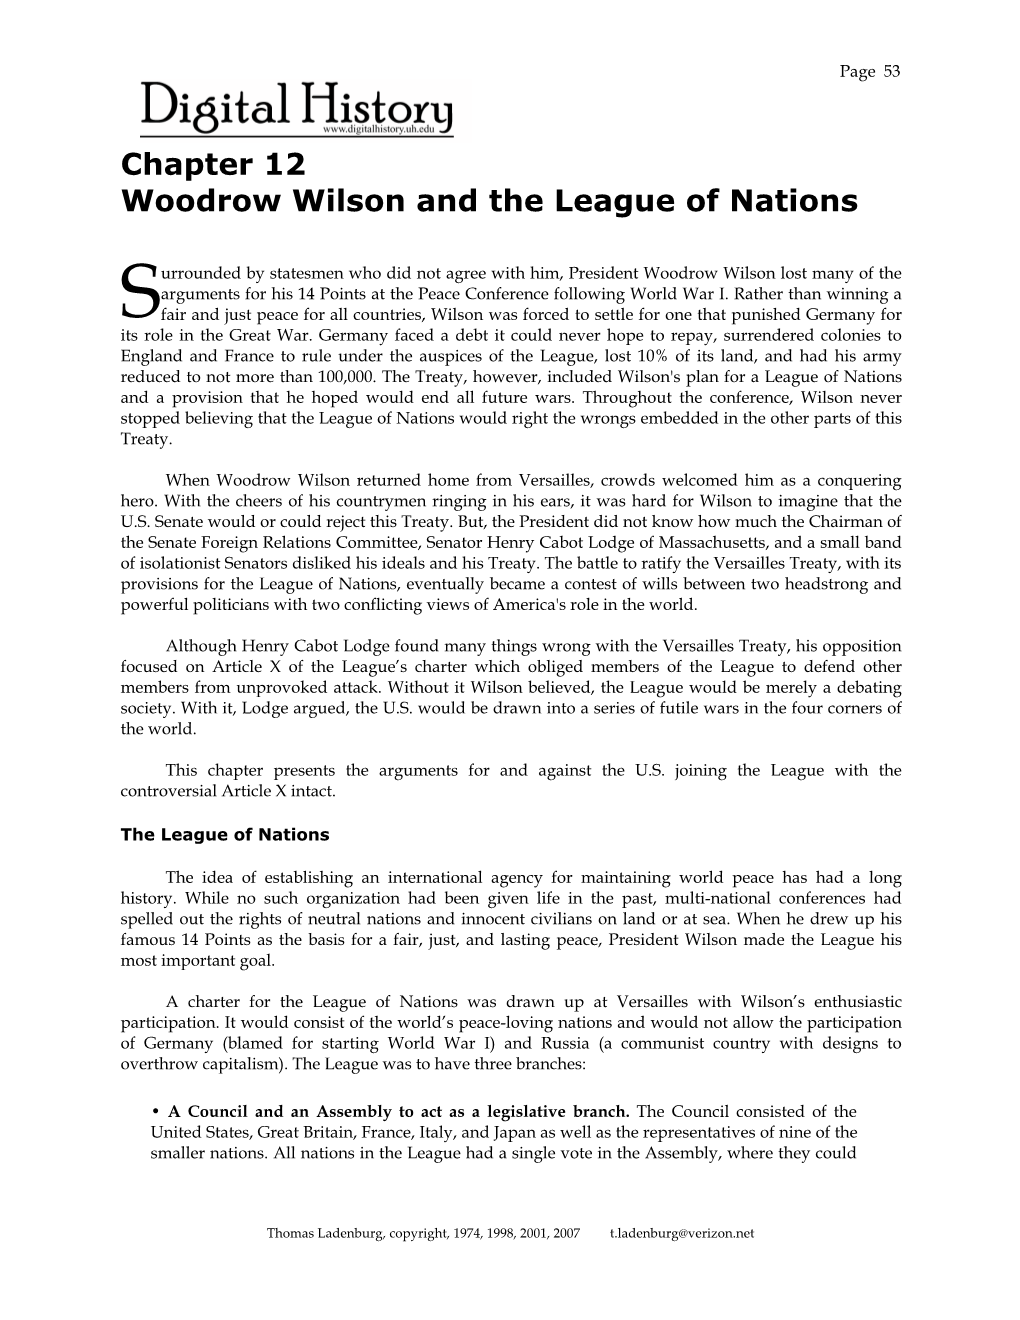 Chapter 12 Woodrow Wilson and the League of Nations